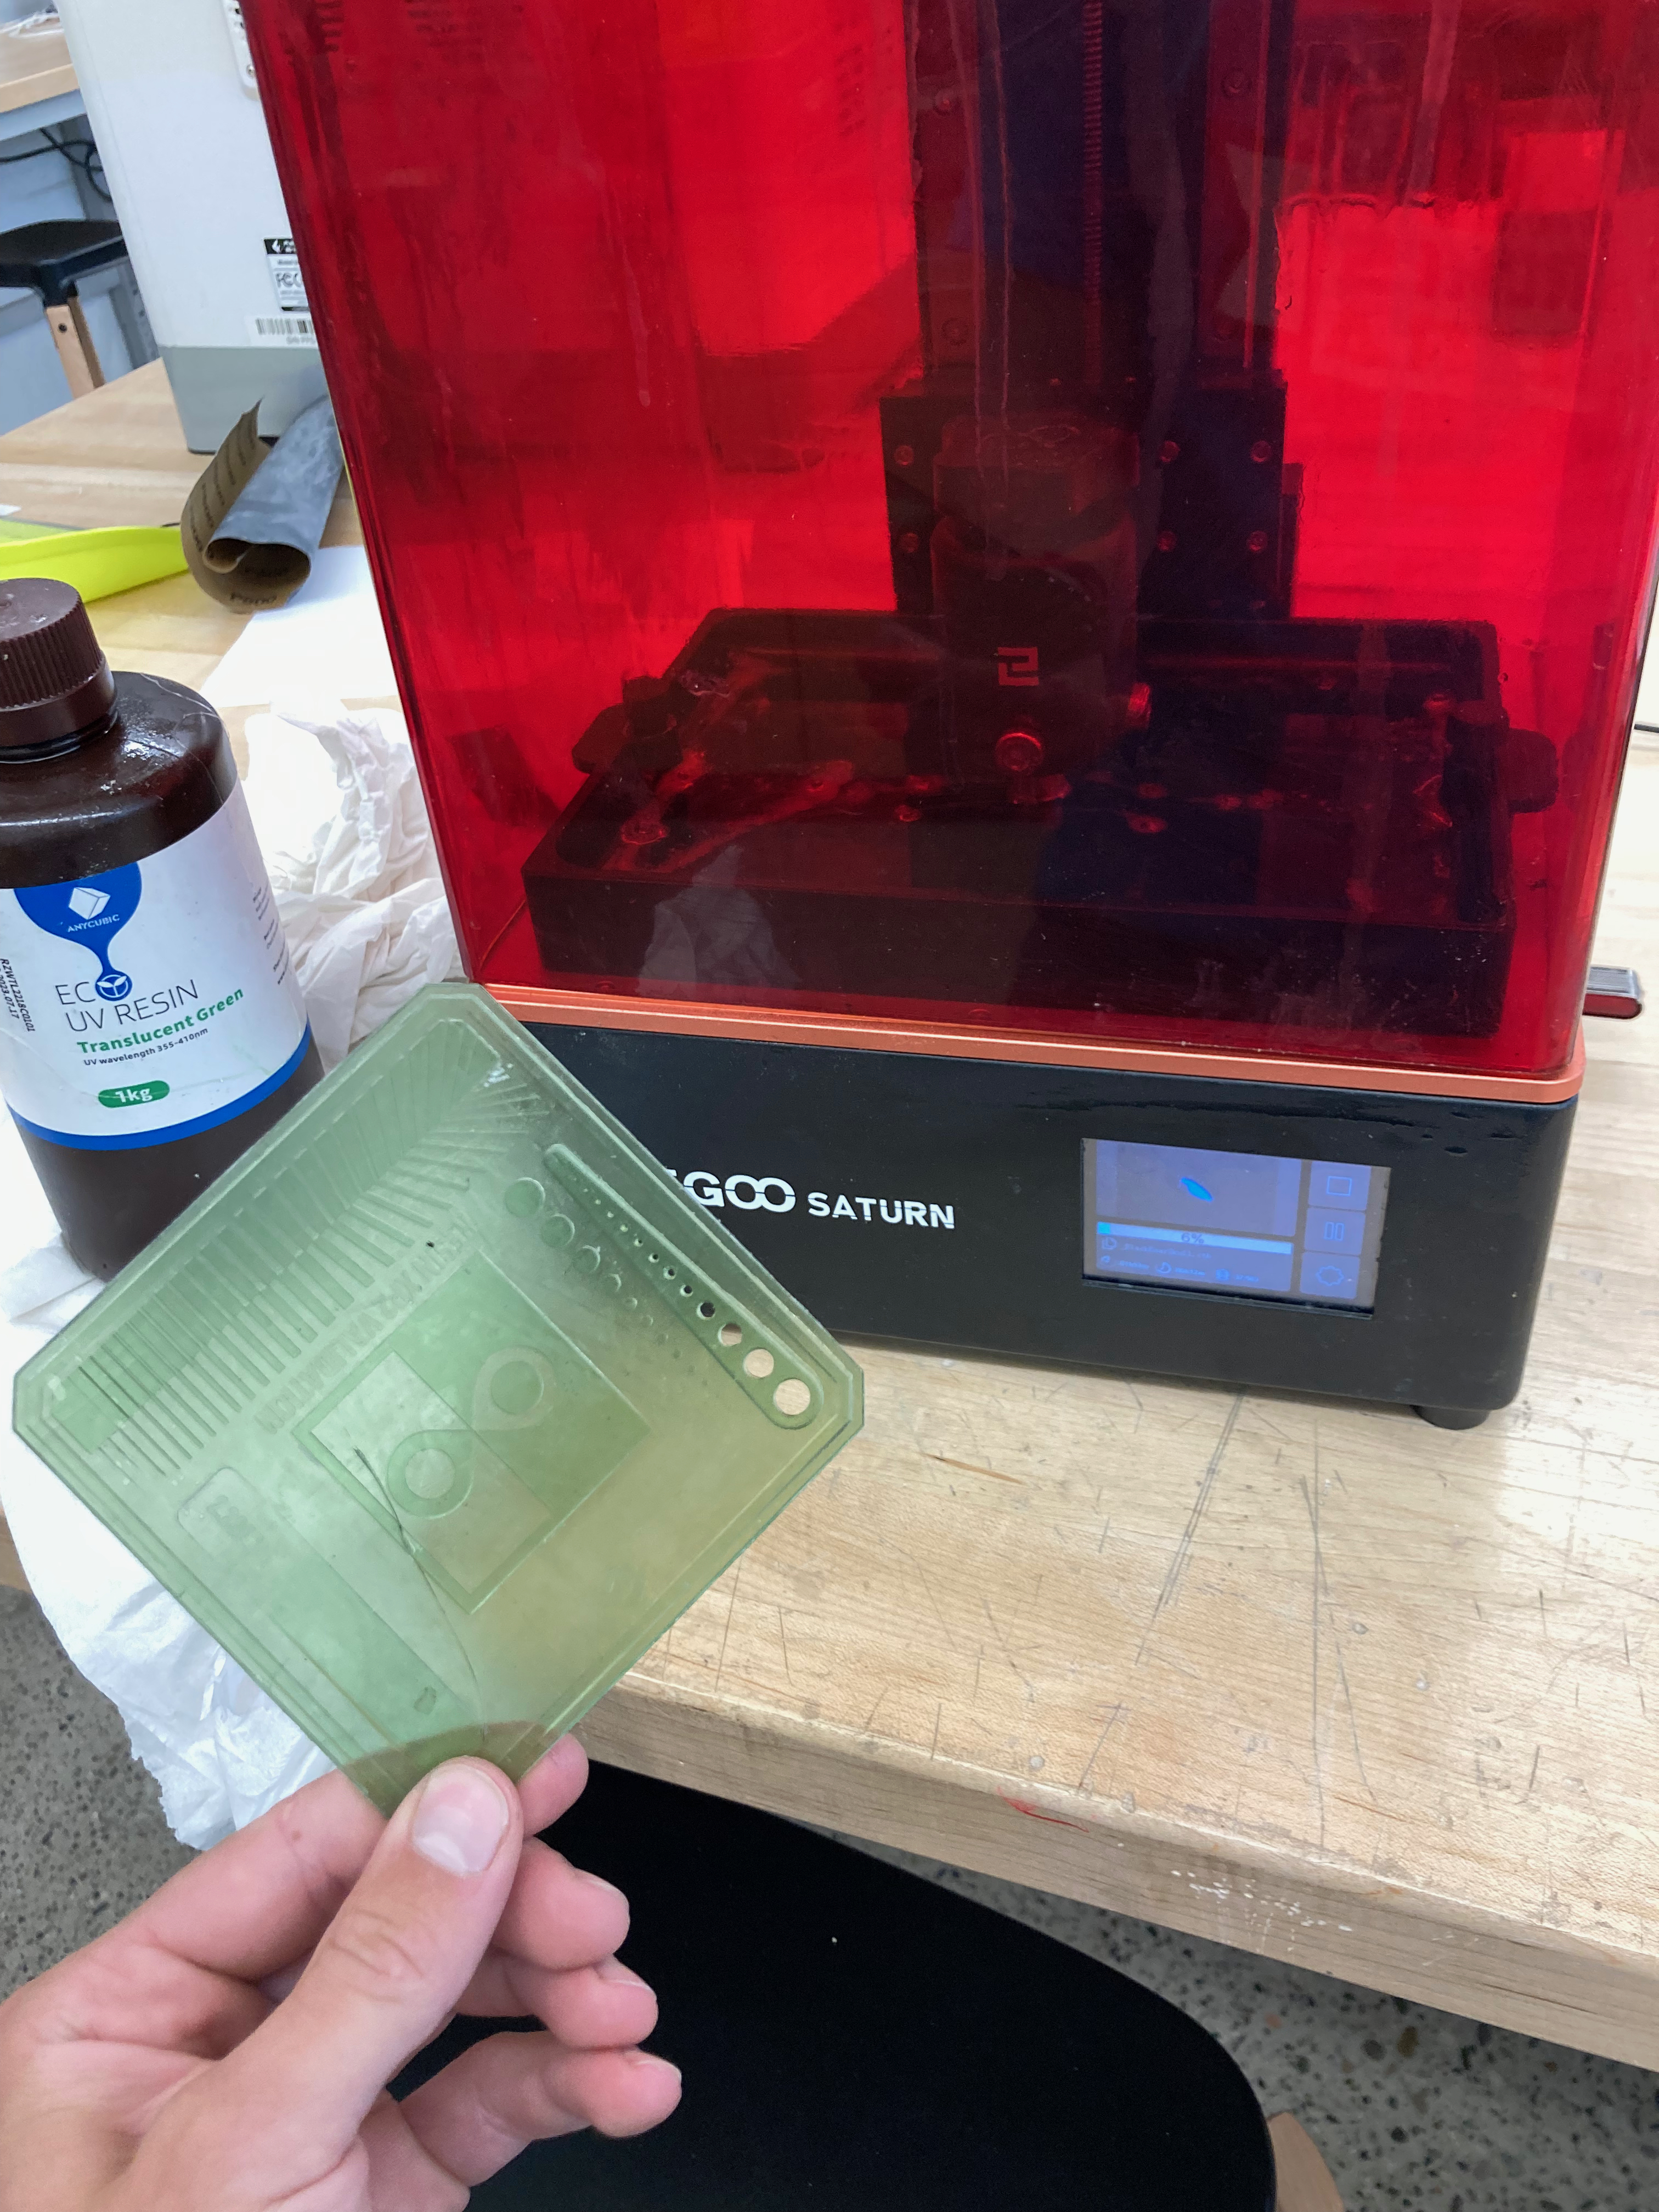 Tabletop resin printer with a test print held in front